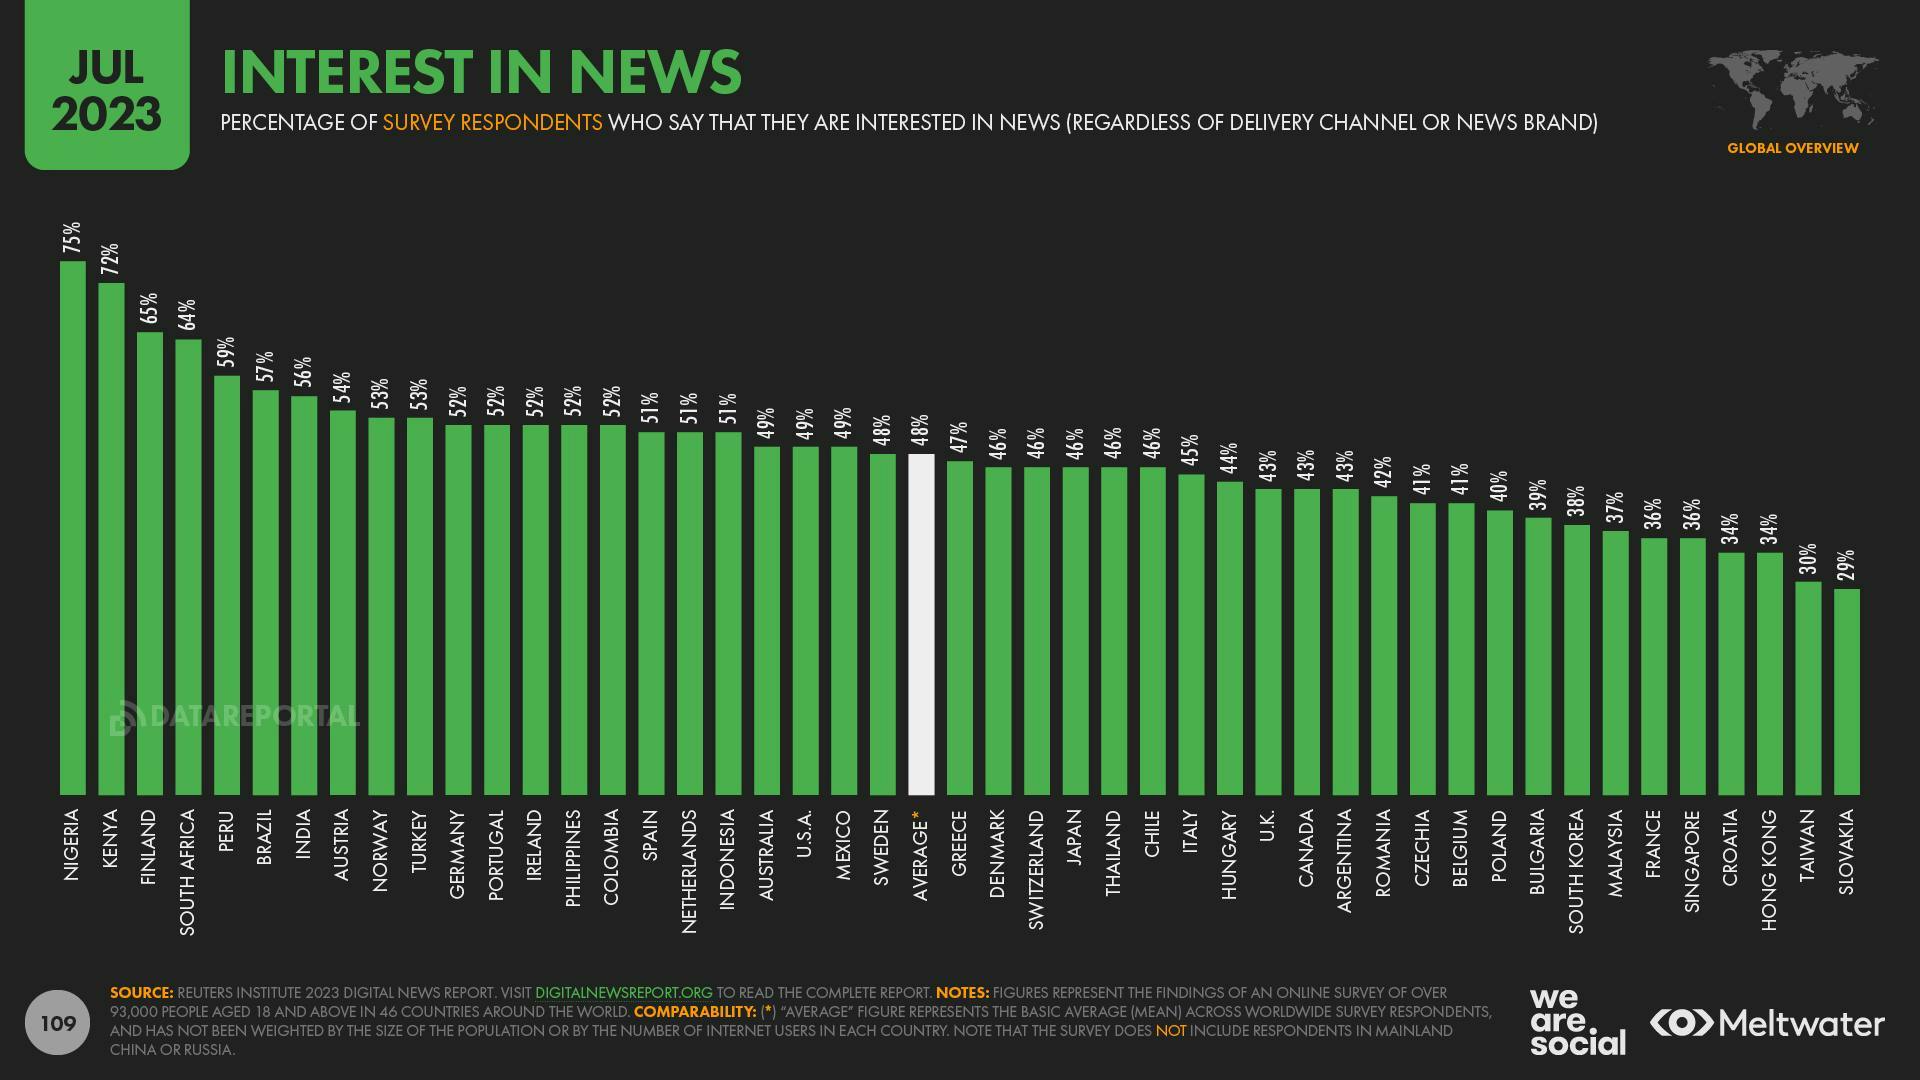 A bar chart showing the percentage of adults interested in news across countries with the global average at 48%, according to RISJ survey data.